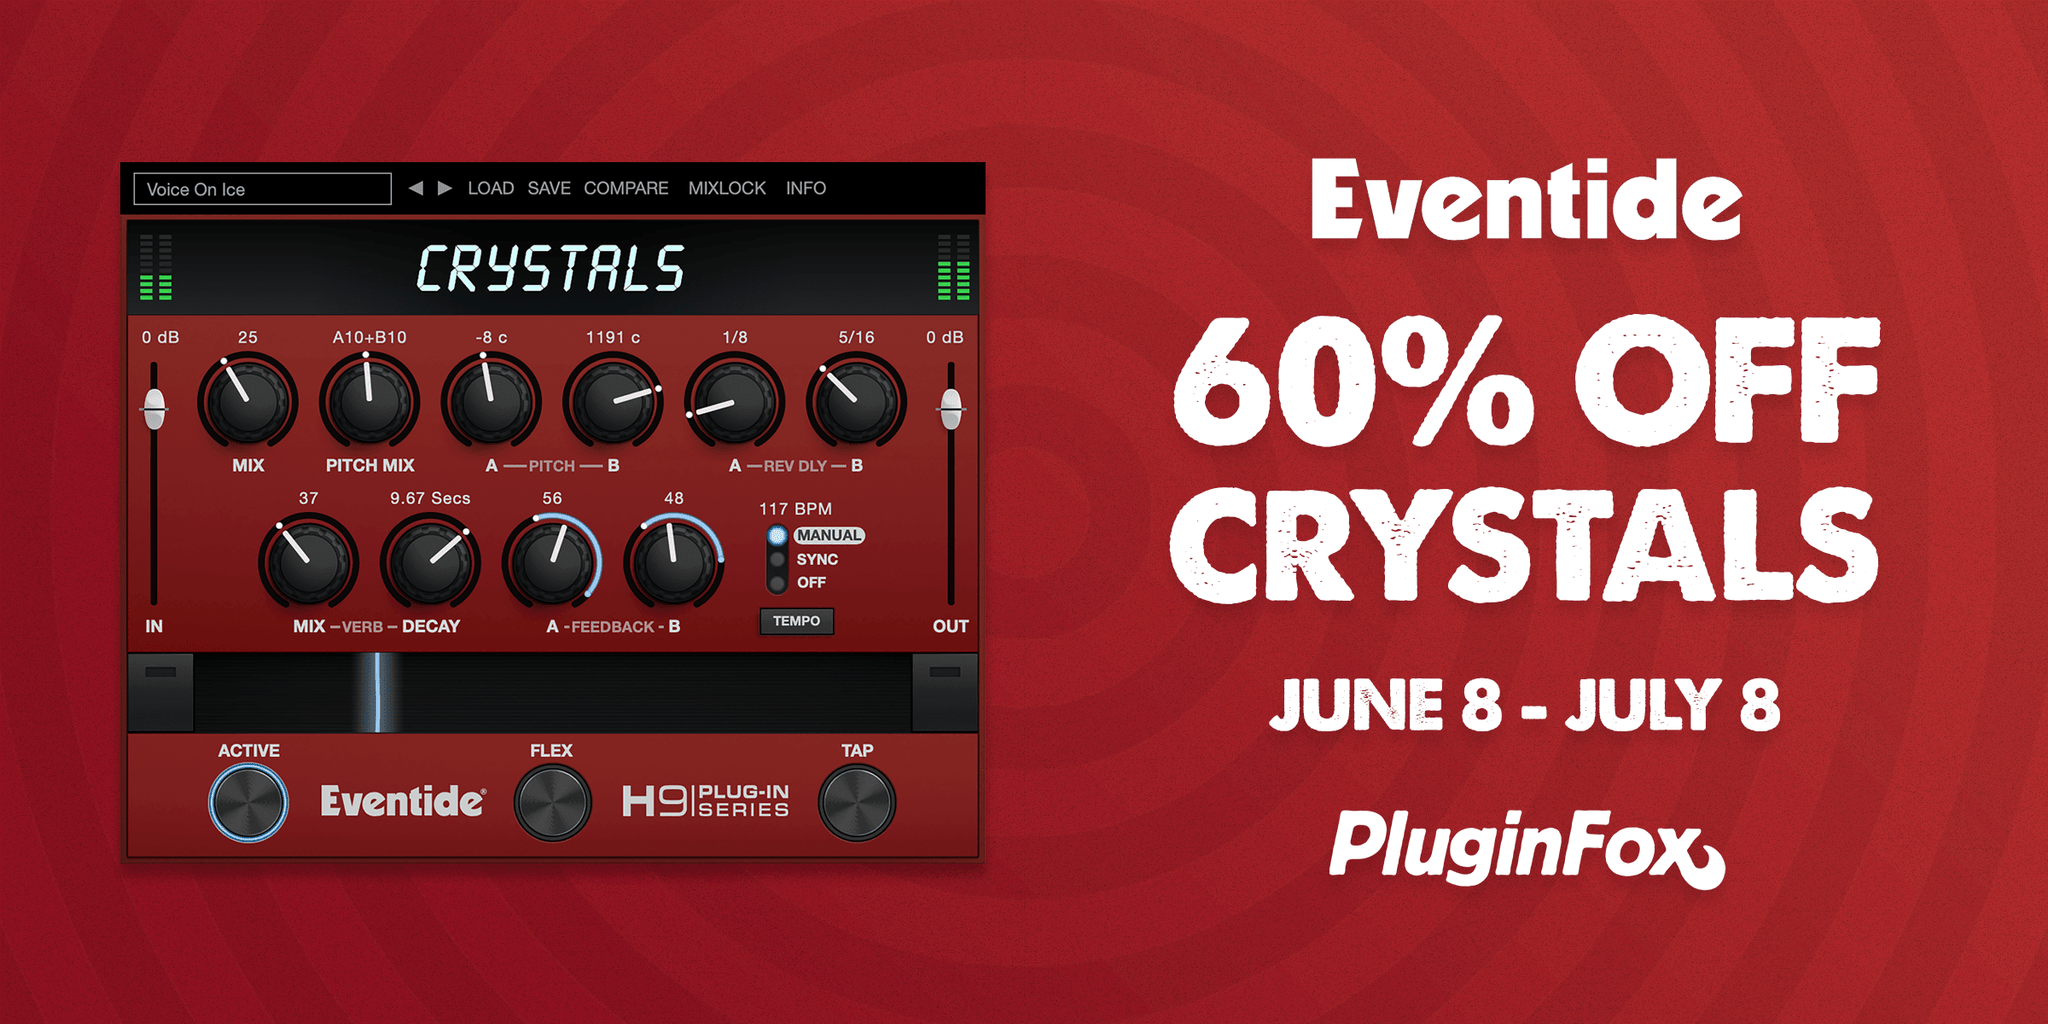 Eventide Crystals Intro Sale - June 8 - July 8